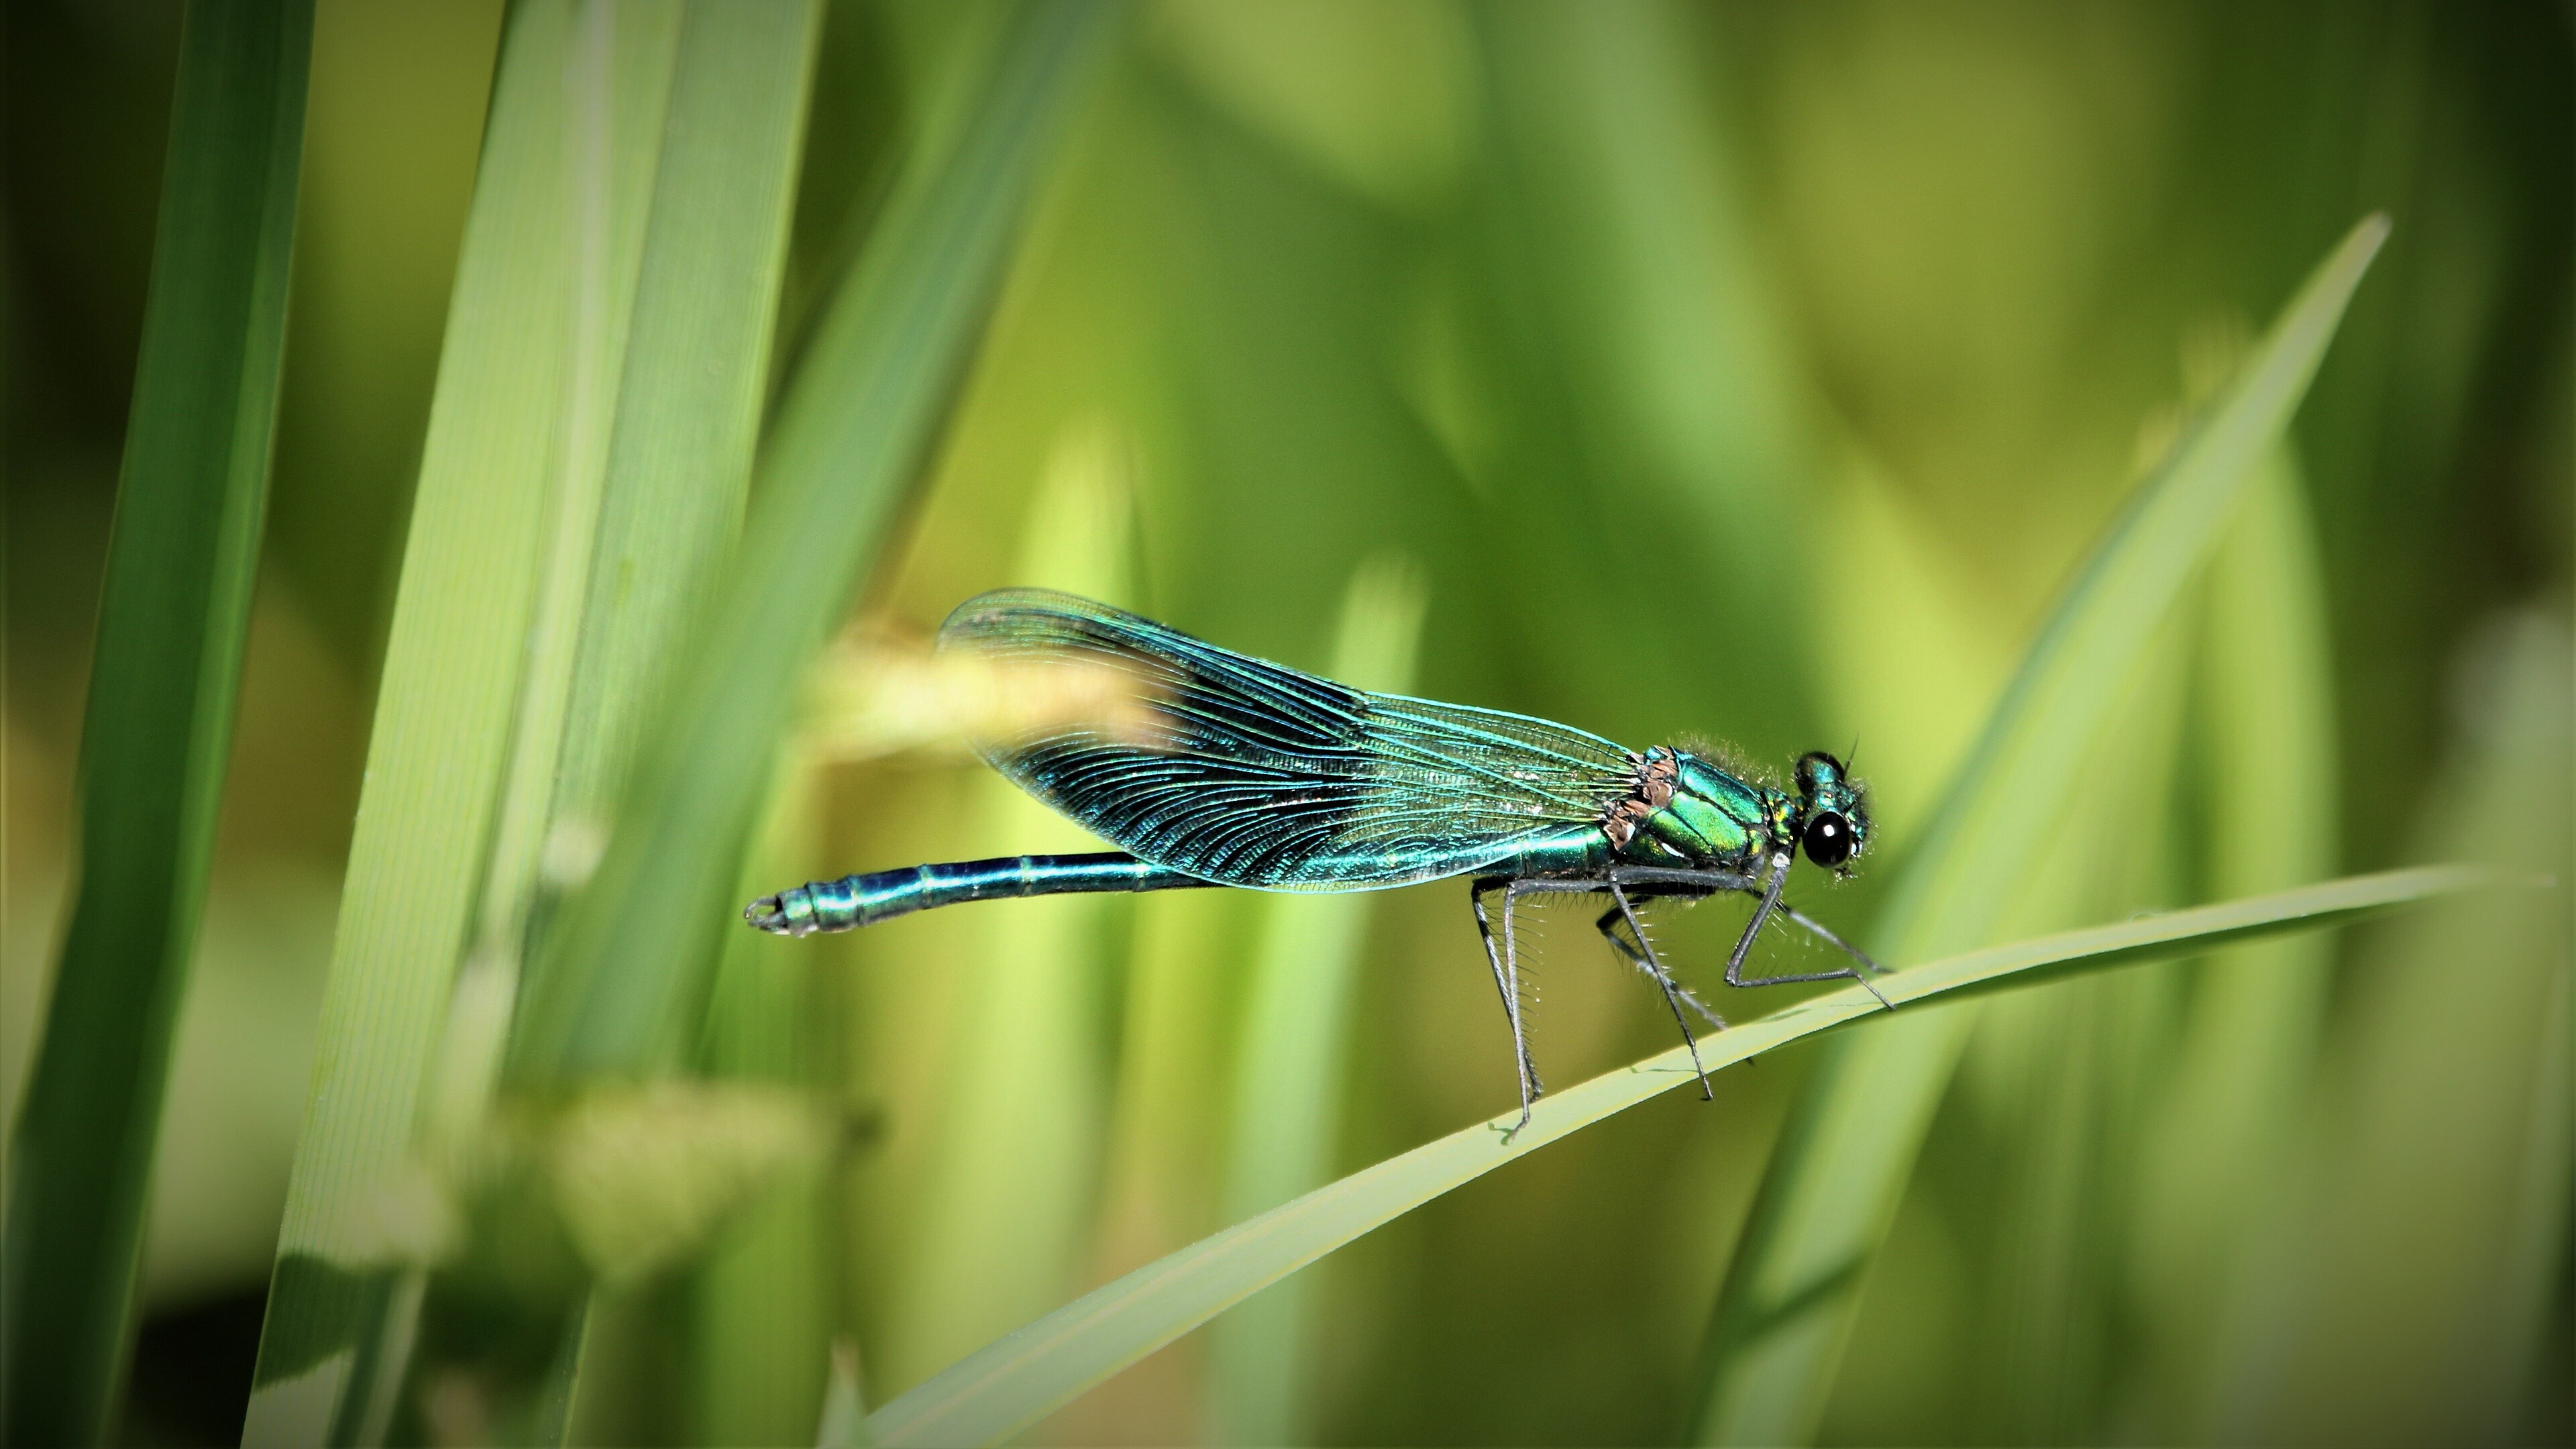 Dragonfly: Characterized by two pairs of strong, transparent wings, sometimes with colored patches, and an elongated body. 3840x2160 4K Background.